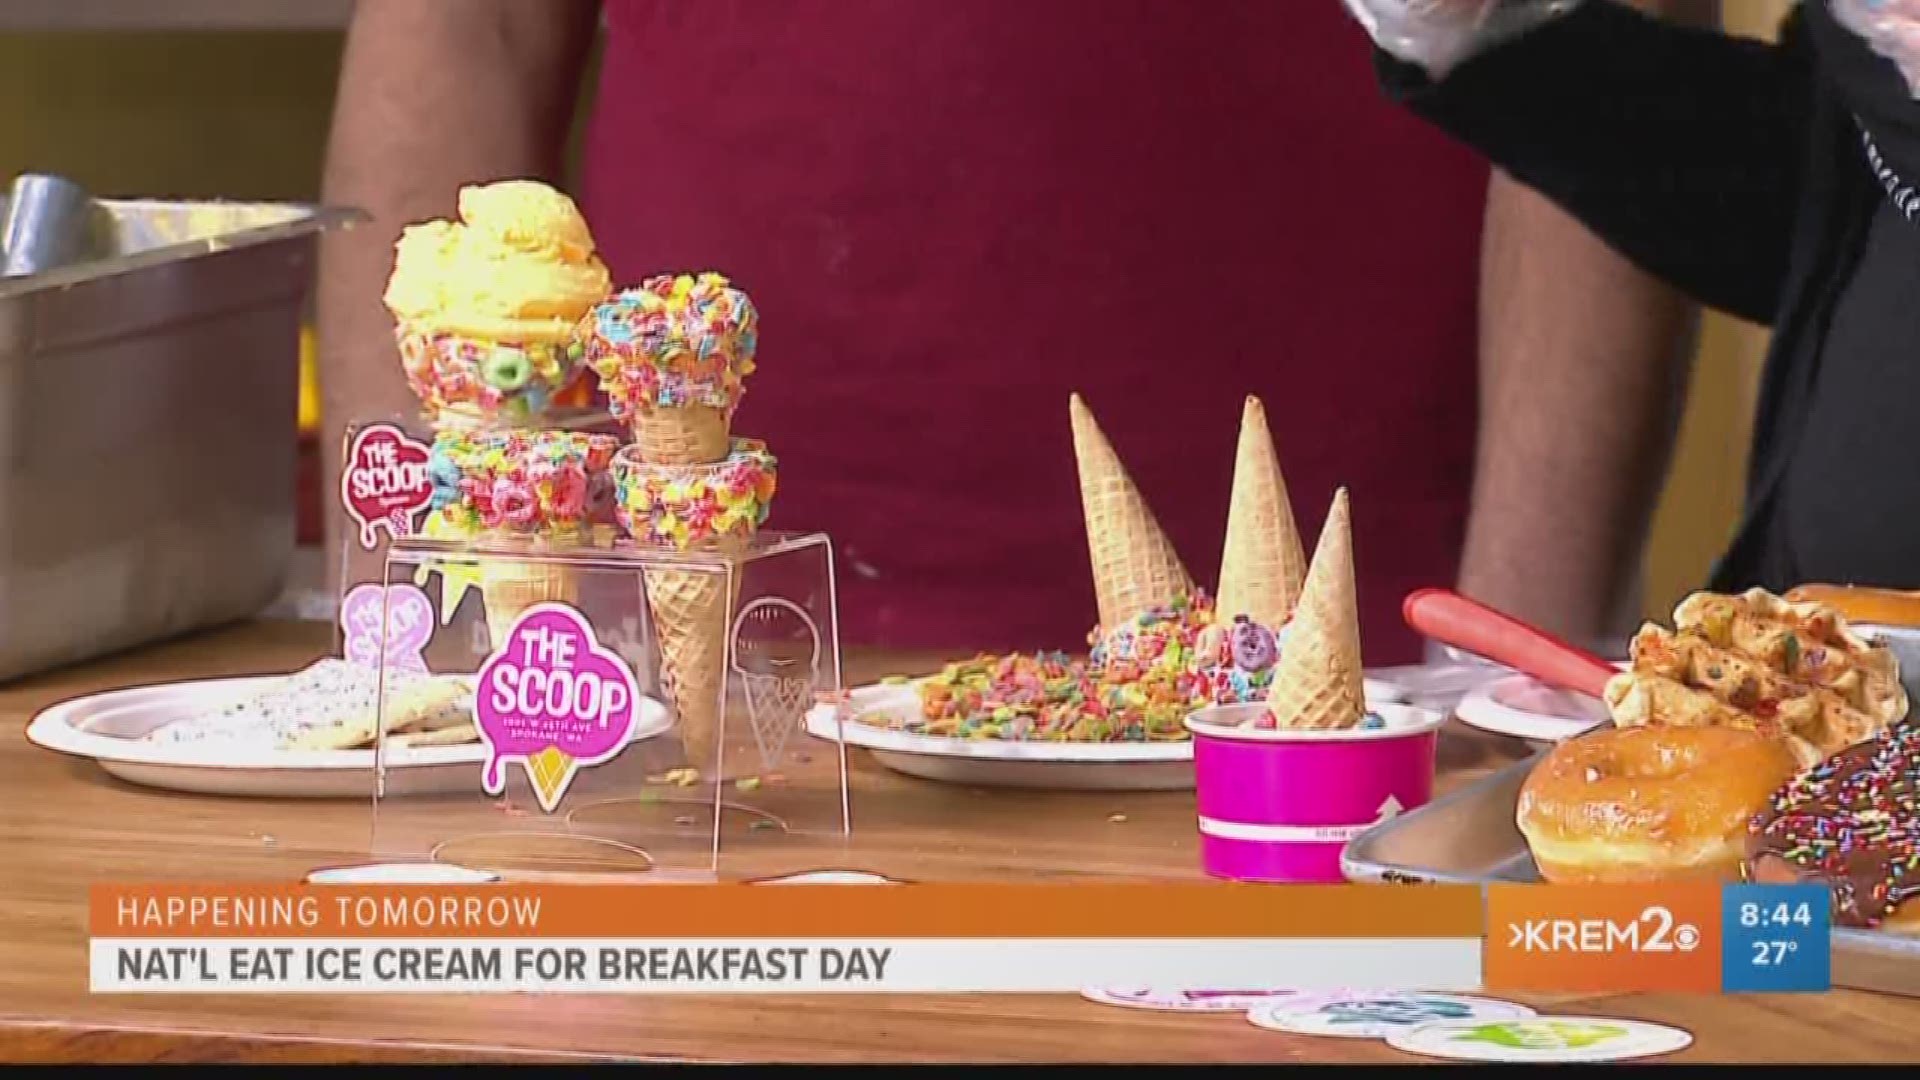 Jennifer Davis and Gerardo Garnica from The Scoop visited KREM's Brittany Bailey and Jen York in the studio with Ice Cream, in honor of National Eat Ice Cream for Breakfast Day on Saturday.